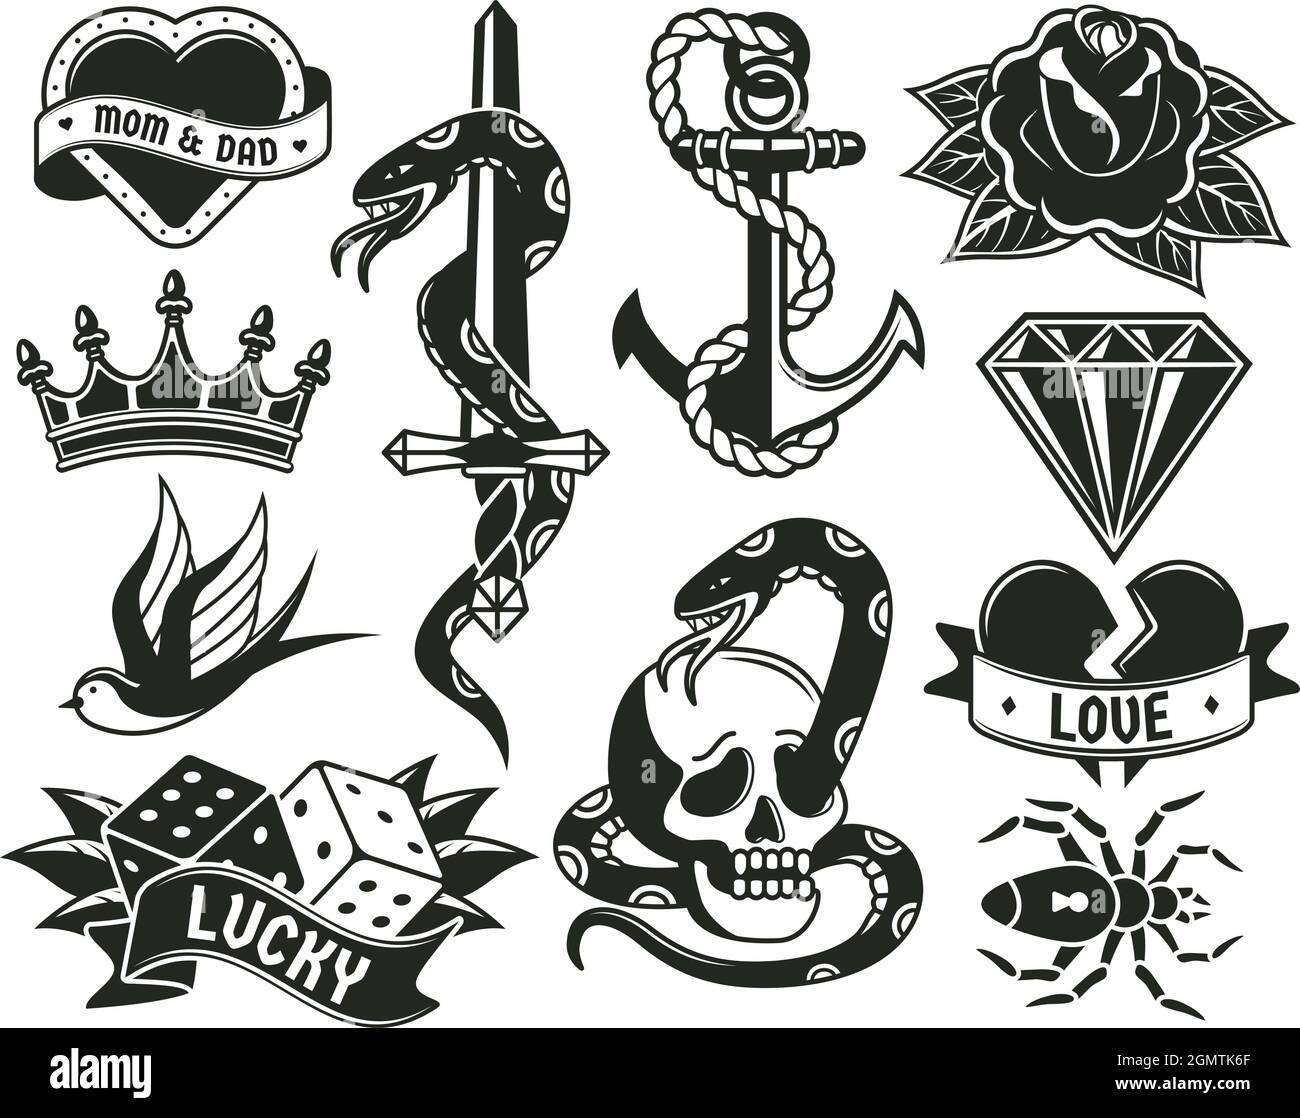 Old school tattoo symbols, heart, knife, knot, roses. Retro tattooing elements snake, crown and dice symbols vector illustration set. Vintage Stock Vector